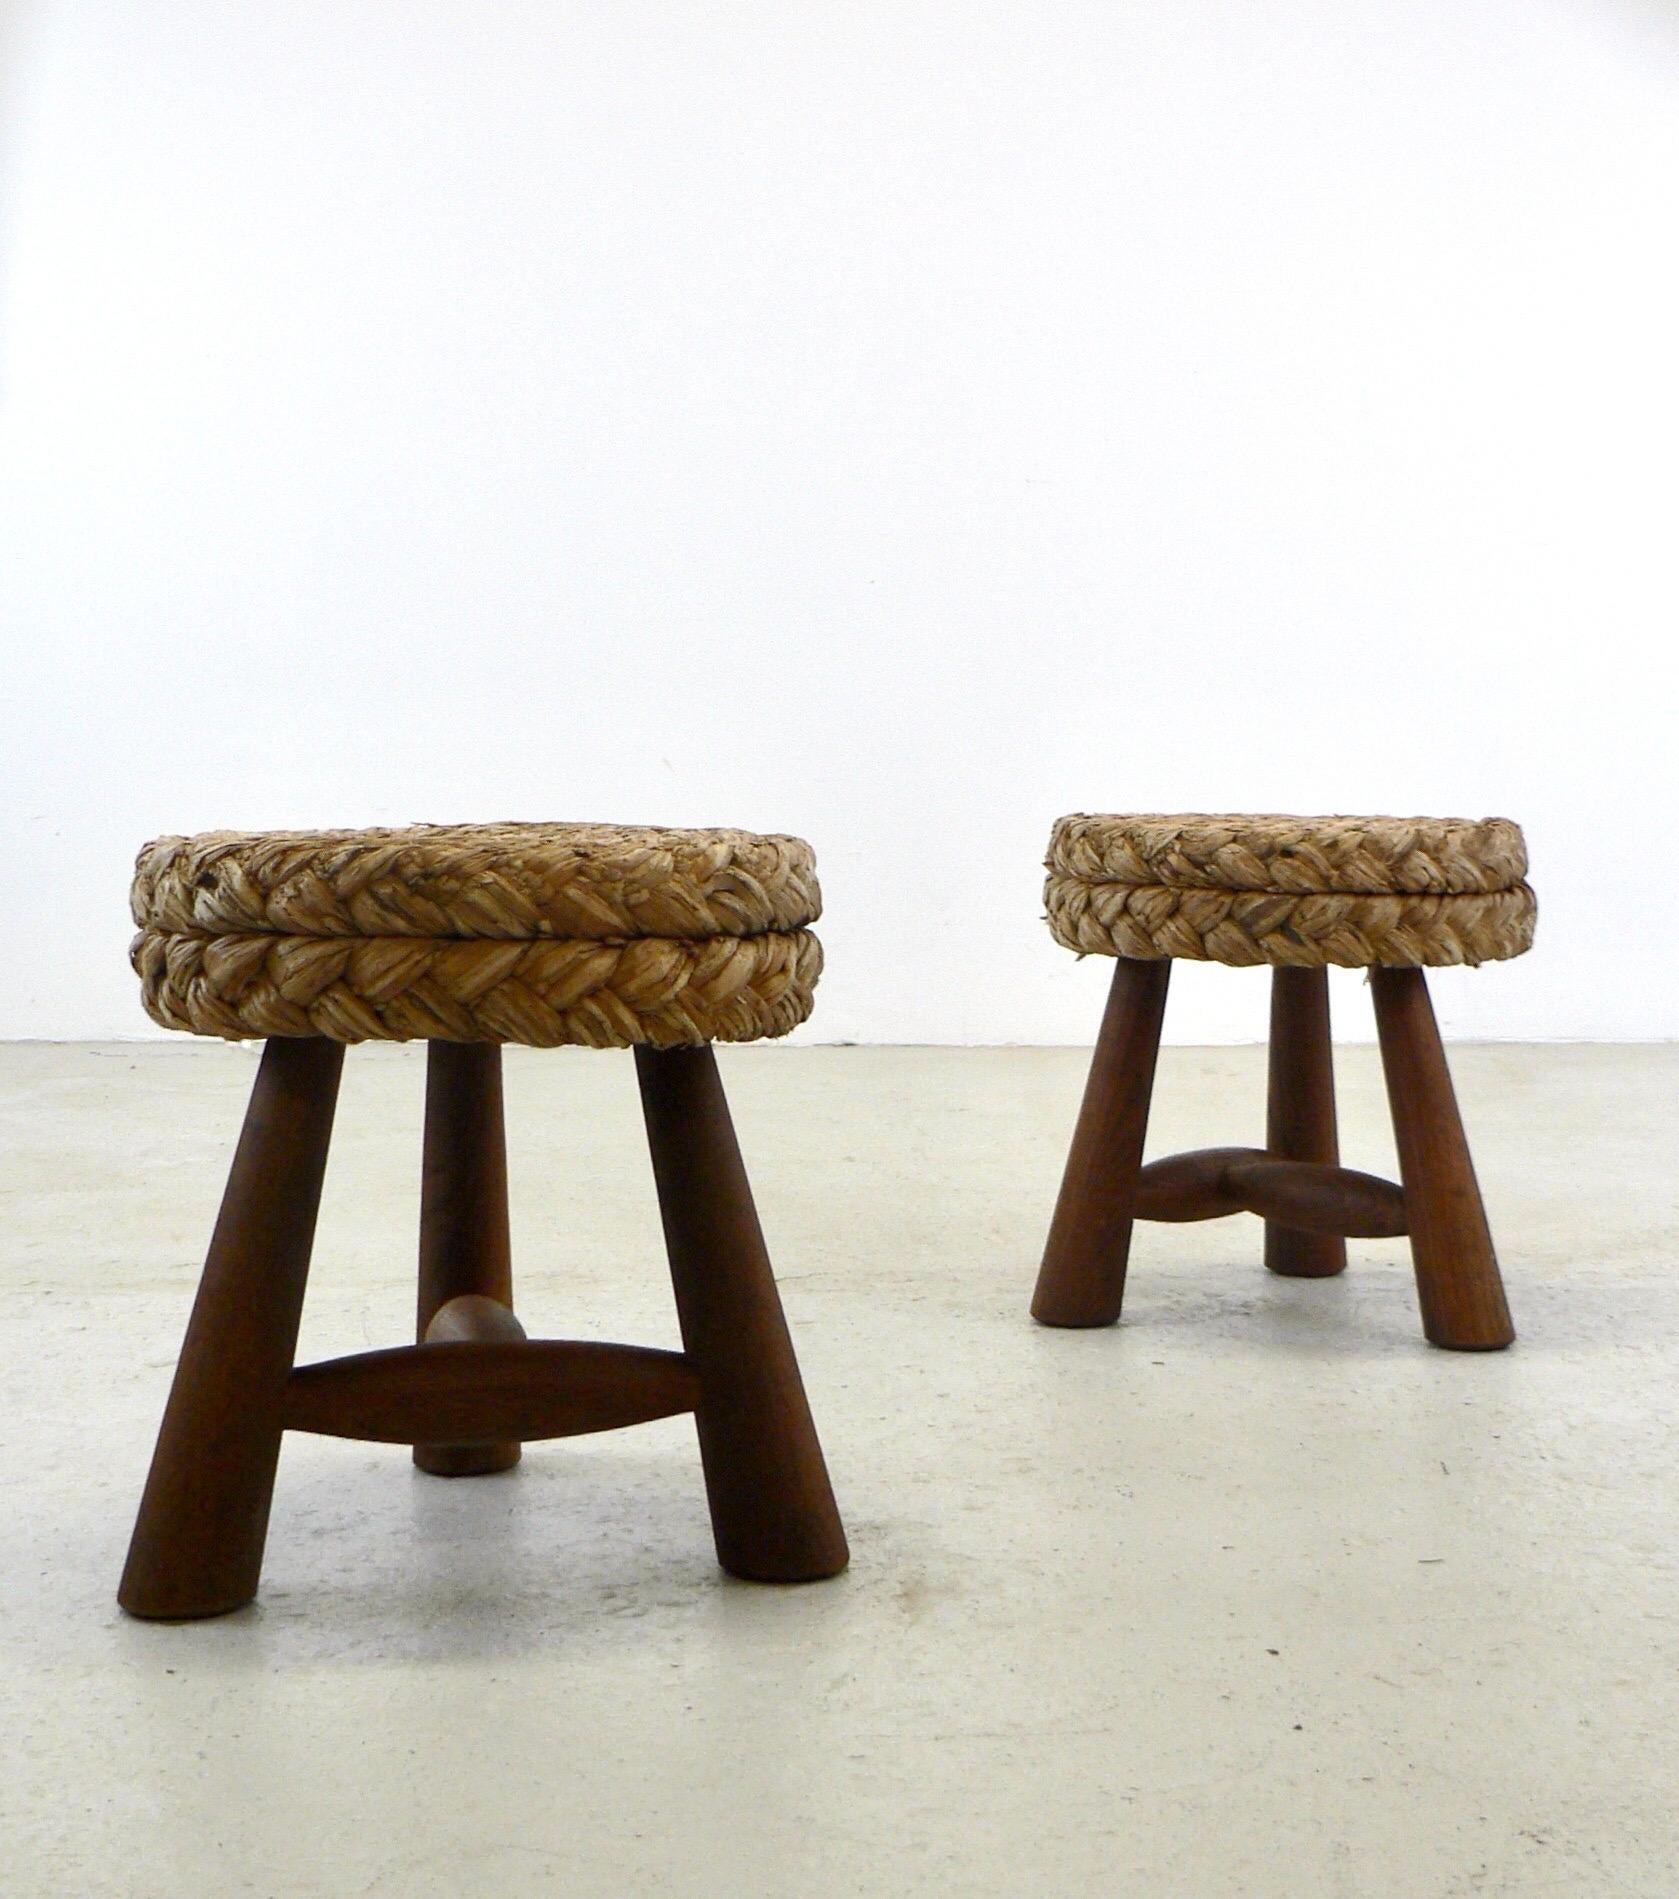 Mid-century French low Shepard's stools designed by Adrien Audoux and Frida Minet. This rustic French poufs showcase a circular seat crafted from woven raffia/rattan, supported by tripod legs and an oak keel base. Maintaining its original condition.